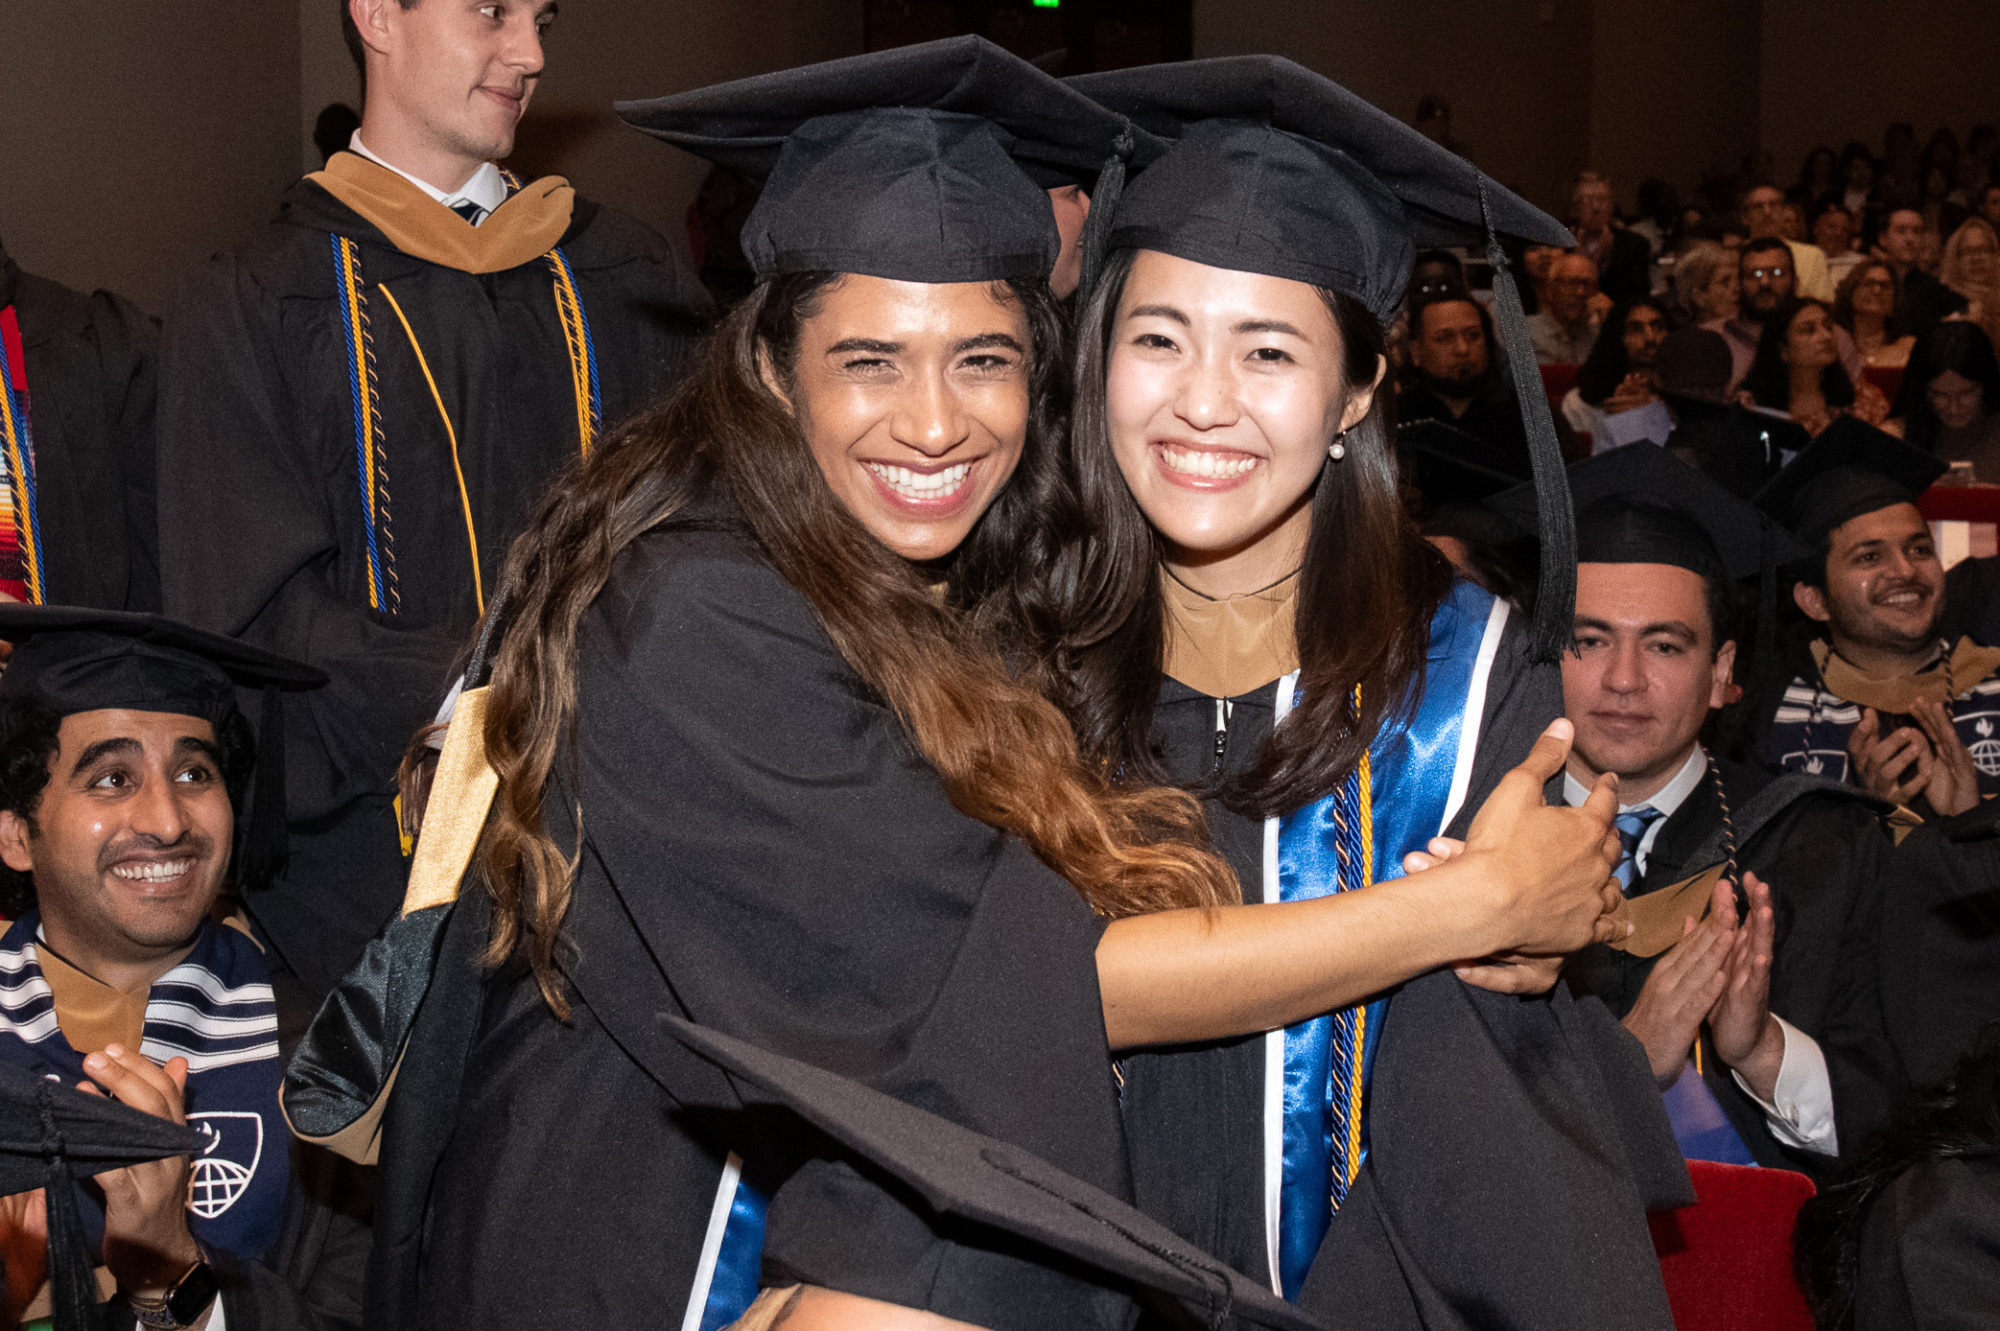 two people posing for photos in graduation regalia. one has hands around the other